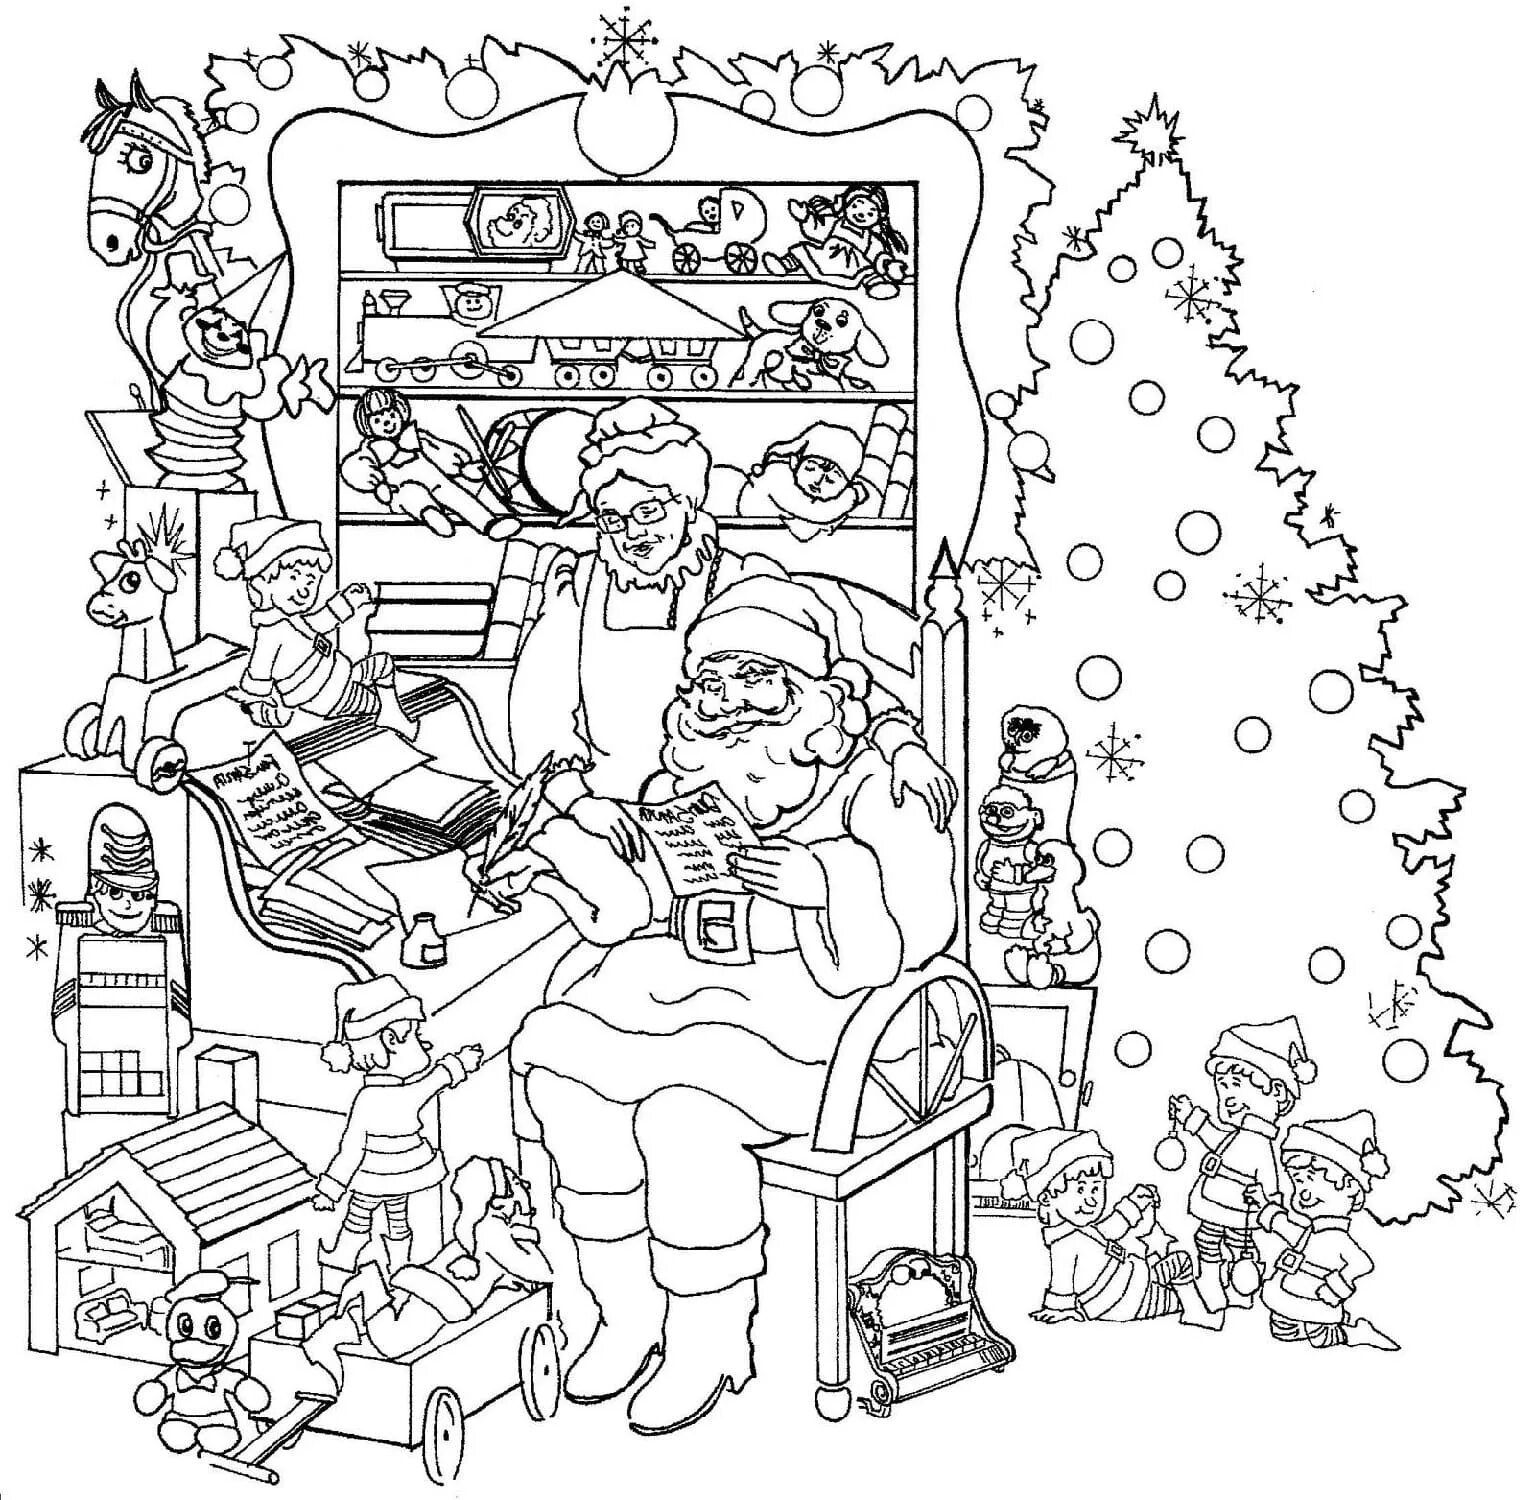 Sublime Christmas miracle coloring page